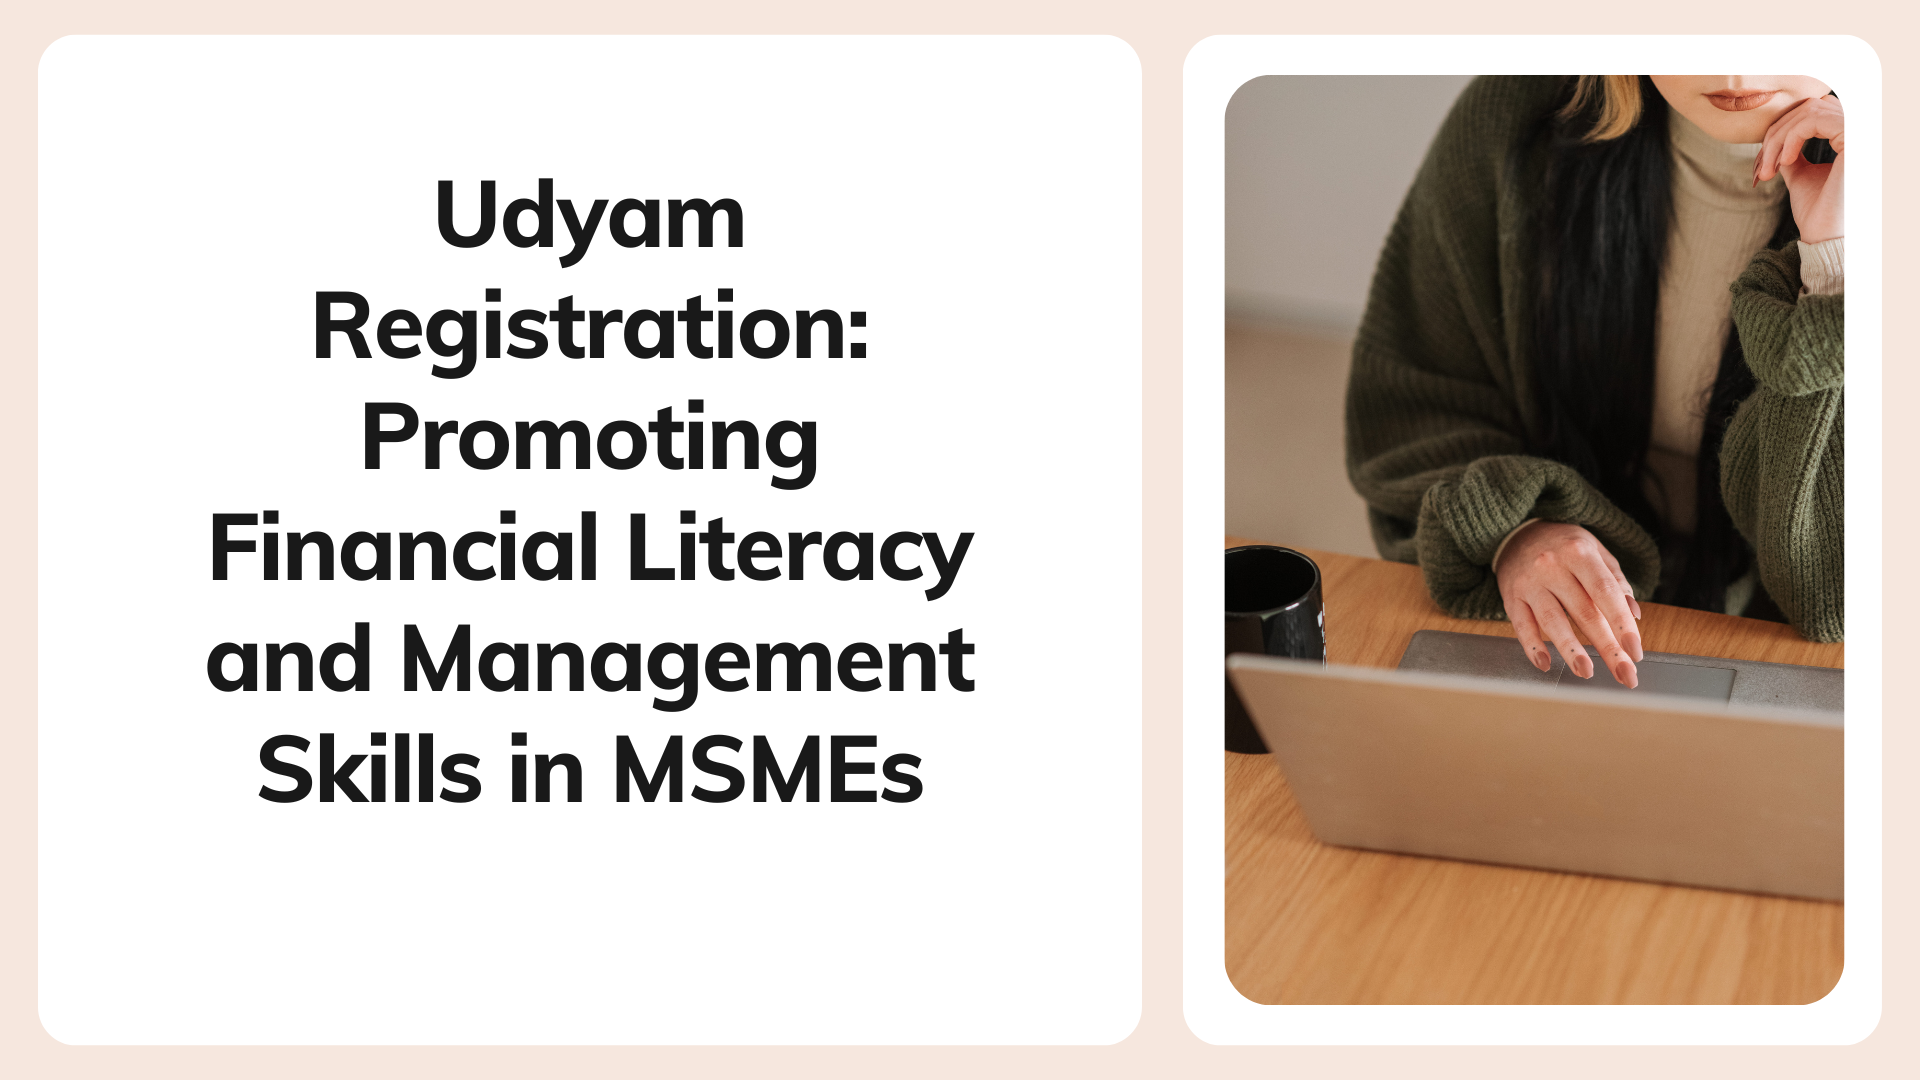 Udyam Registration Promoting Financial Literacy and Management Skills in MSMEs